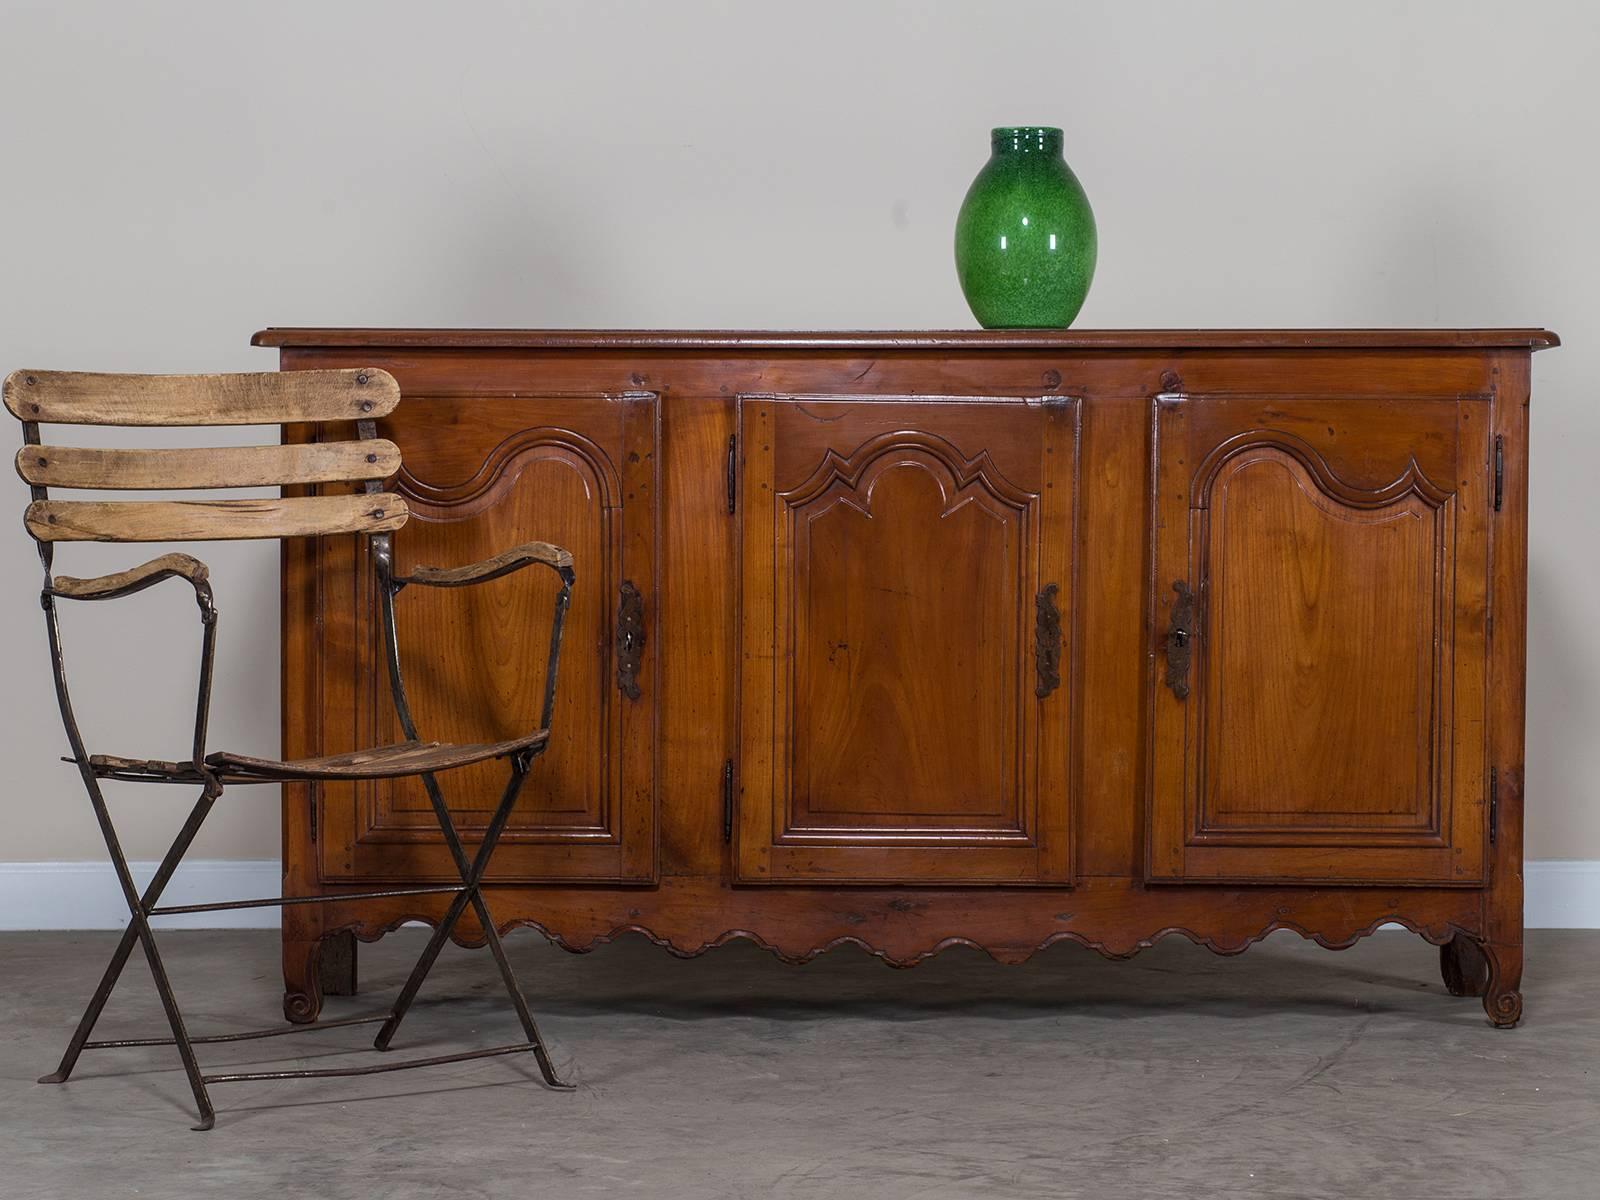 Receive our new selections direct from 1stdibs by email each week. Please click 